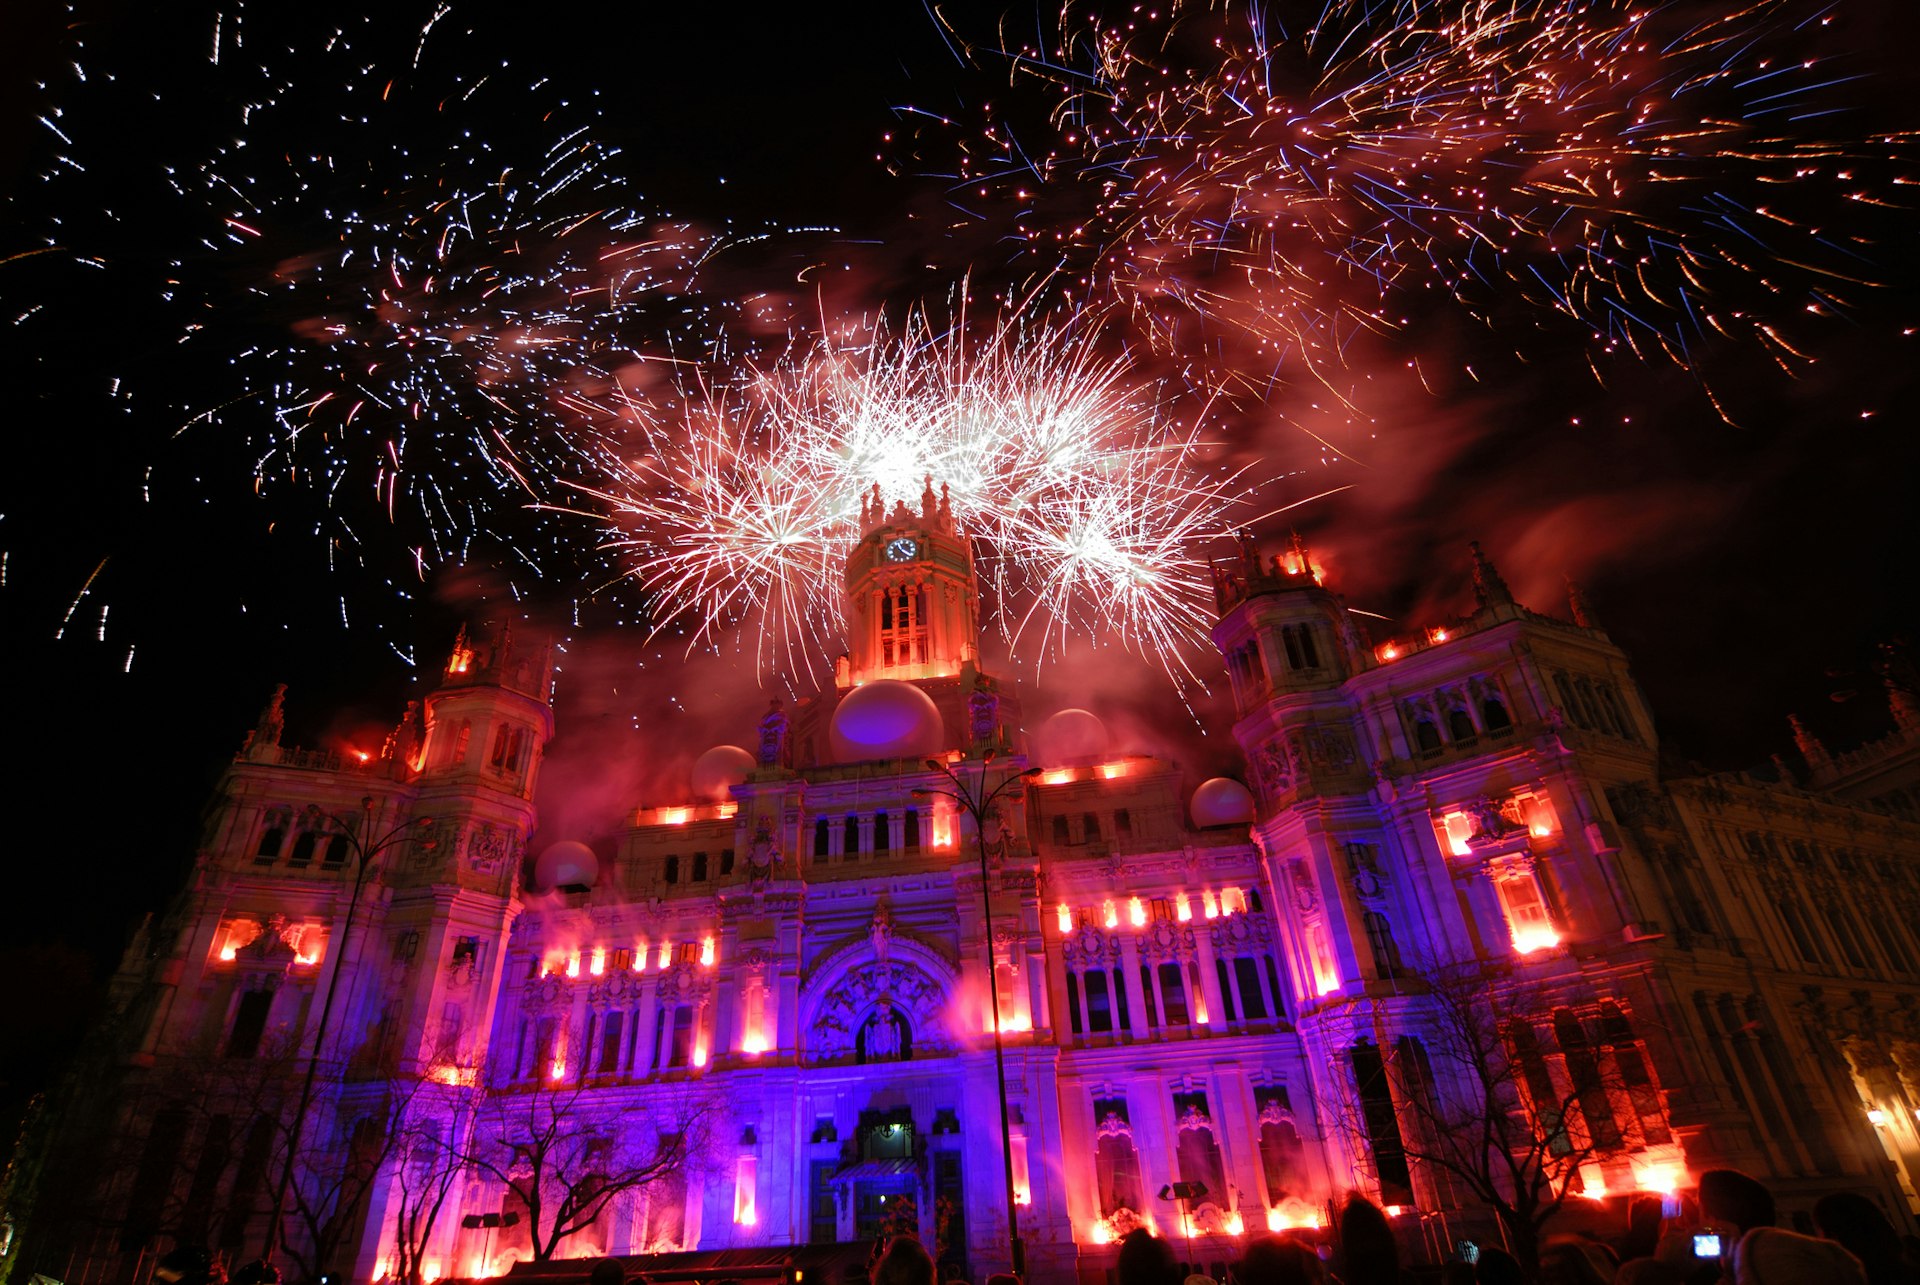 Fireworks explode in red and yellow over Madrid's city hall as part of New Year celebrations